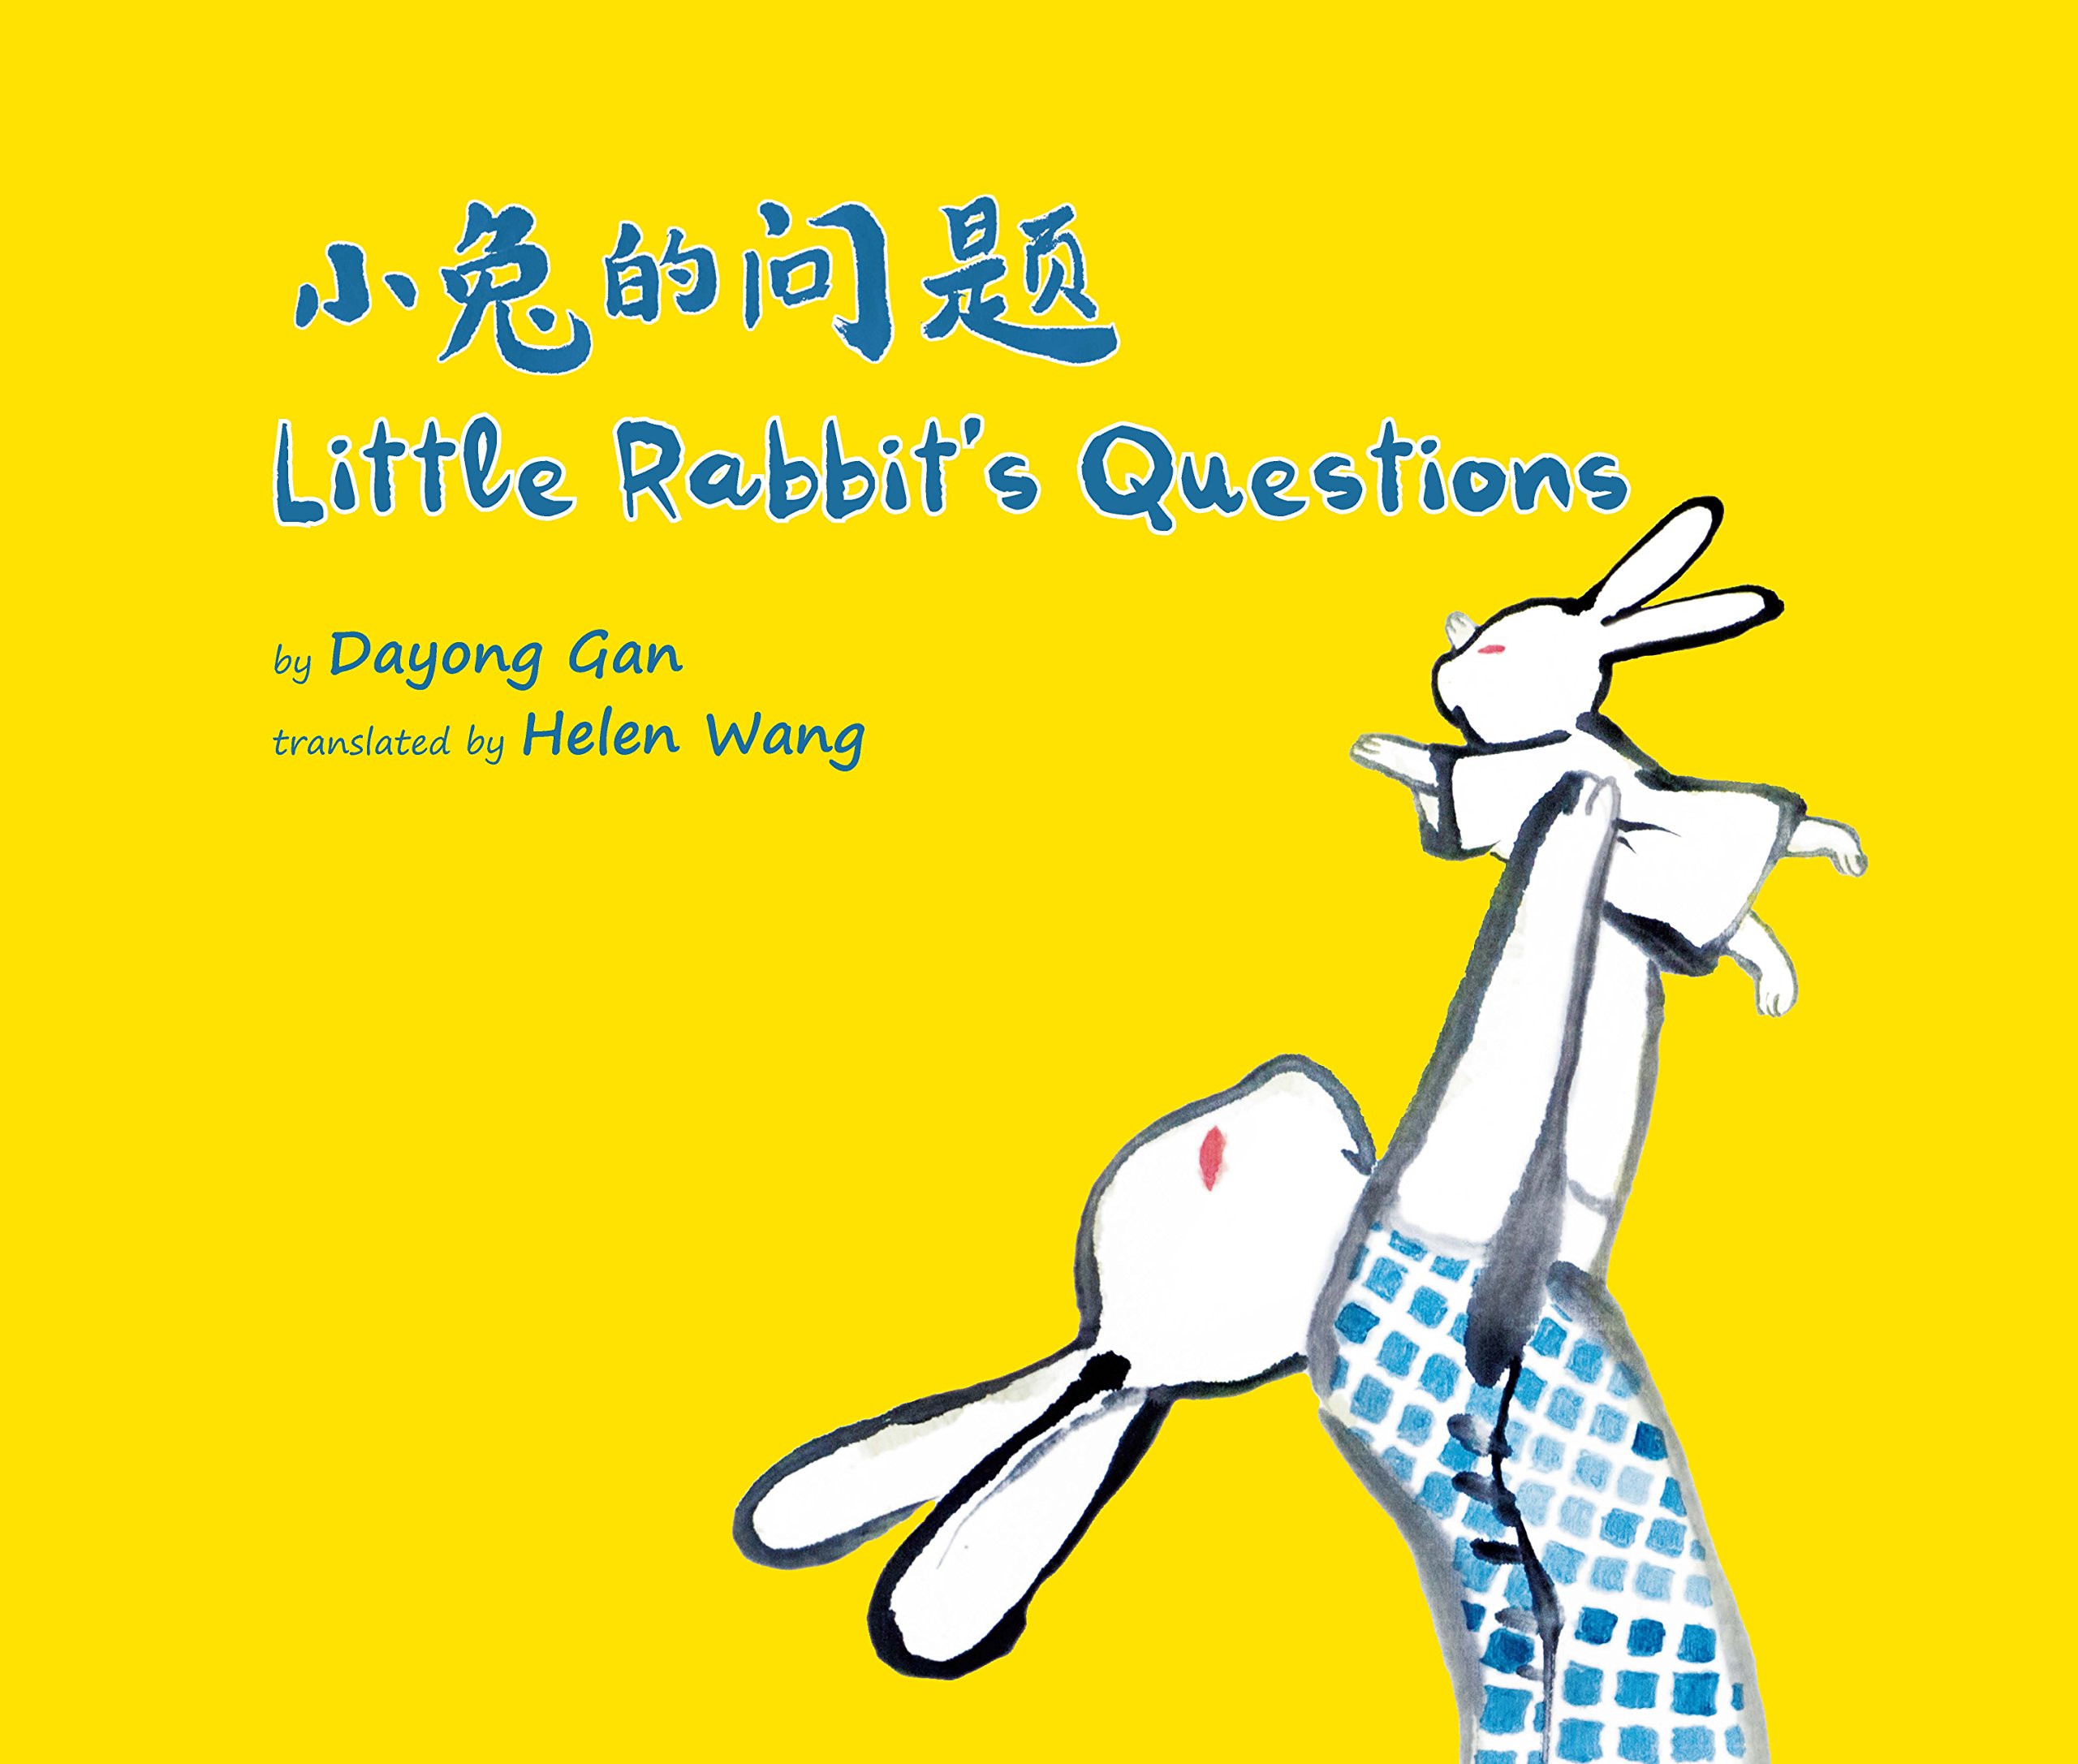 Little Rabbit’s Questions – 小兔子的问题 – by Dayong Gan
and translated by Helen Wang